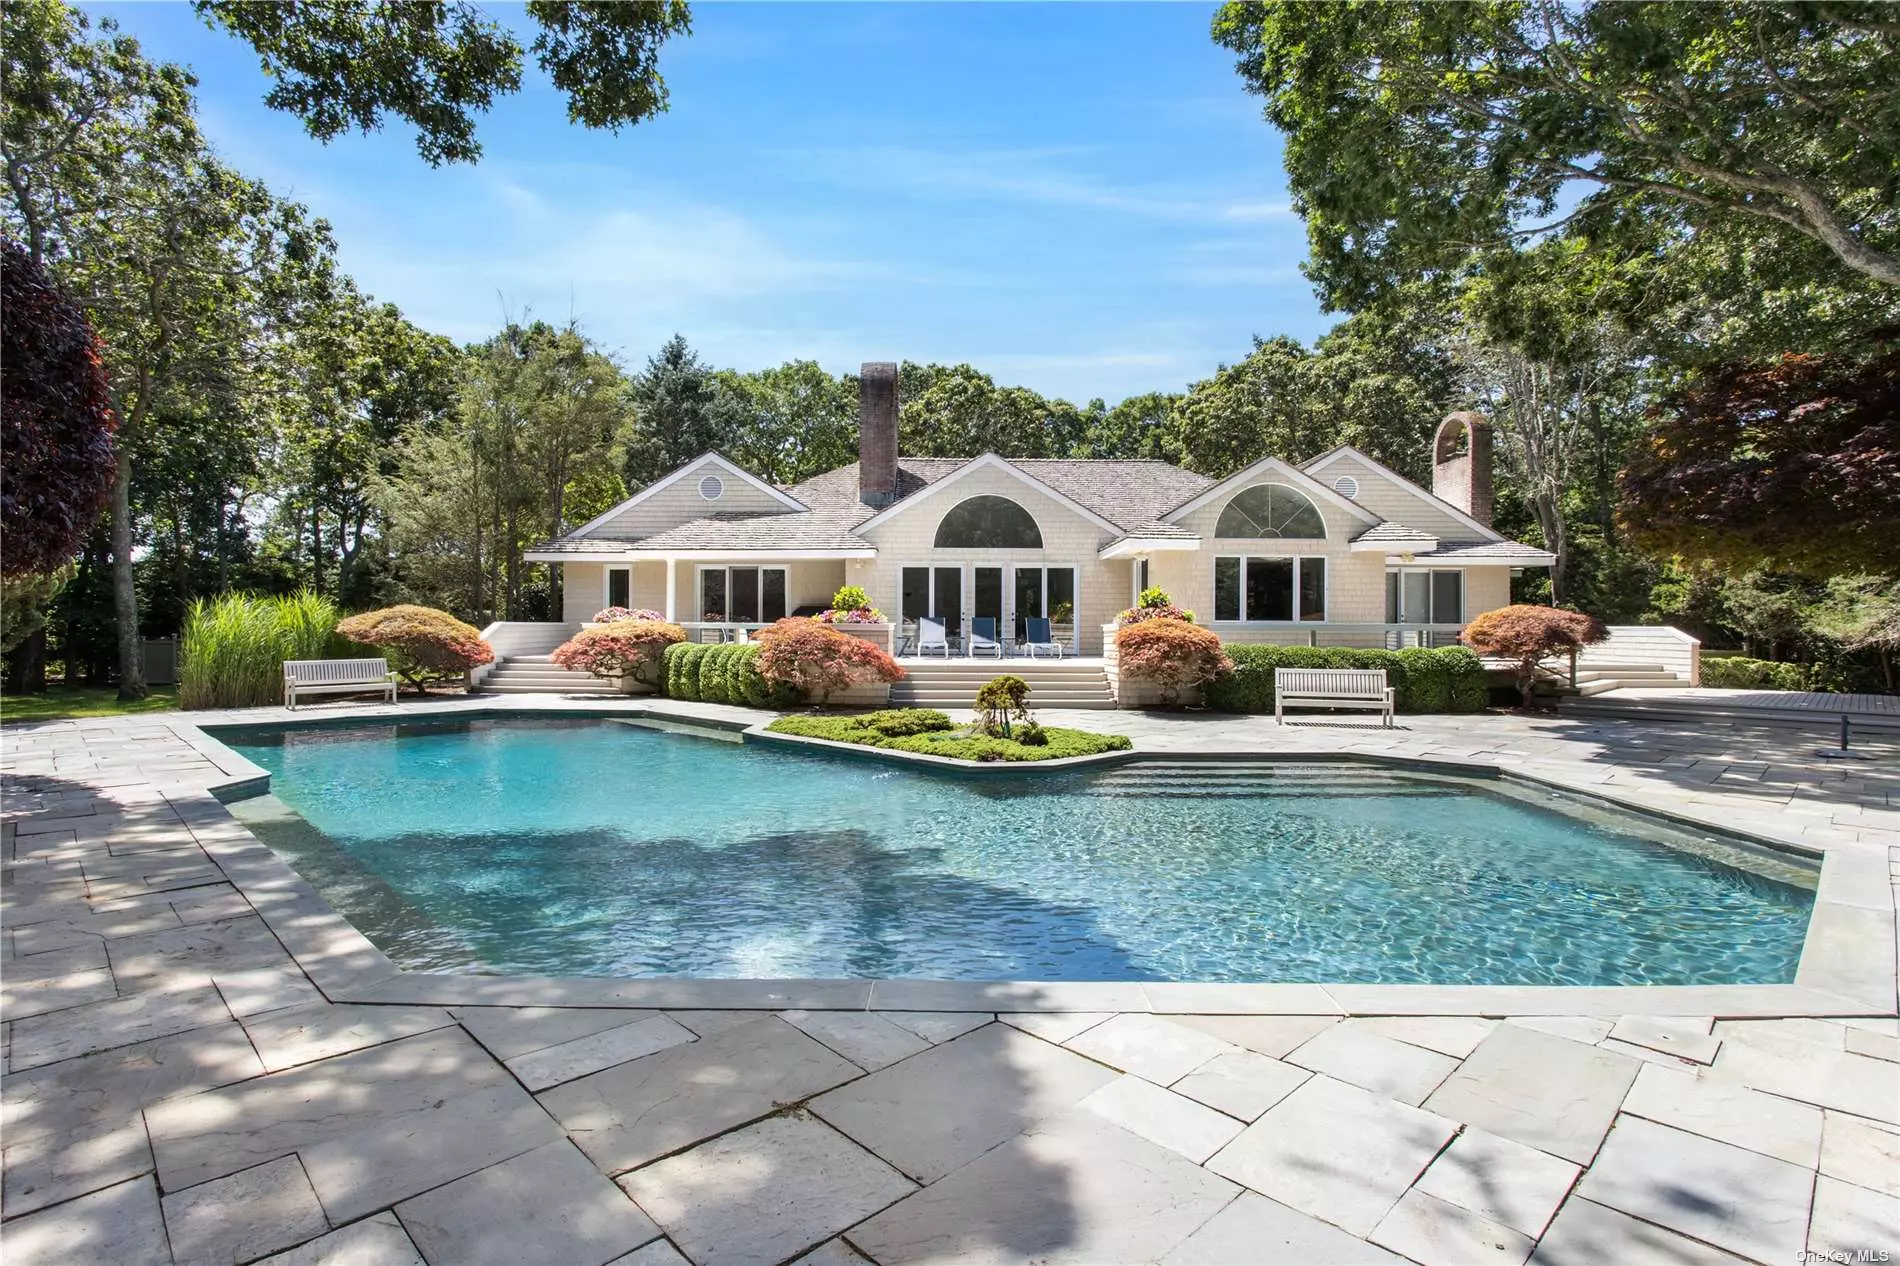 This picturesque 2 acre property and home is located at the end of a cul de sac on a country lane in the Village of Quogue. The long stone driveway leads you to the meticulously maintained mature property. The private back yard has an overly large heated gunite pool, a har tru tennis court, and a koi pond with a waterfall. There are stone pavers surrounding the pool and a large deck for entertaining. As you enter the 4, 000 sq. ft. one level home you will be in a great room with soaring ceilings and a large wood burning fireplace. From the front entry you can look out the 4 glass doors and see your secluded back yard. The kitchen has floor to ceiling cabinets, 2 stoves, 2 dishwashers, a large counter that seats six, a wet bar, and a large dining area. The principal bedroom suite is on its own side of the house with a large walk in closet, sauna and a extra large bathroom, the bedroom has glass doors that lead out to the deck. The family room with doors to the back yard can also be a bedroom it has a bathroom en - suite. There are 3 other large bedrooms with one en -suite and another full bath to accommodate the other 2 bedrooms. There is also a 2 car detached garage. This well maintained home is on the market for the first time in over 30 years, with a motivated seller, low taxes and convenient location. This should be your ideal all season luxury retreat.